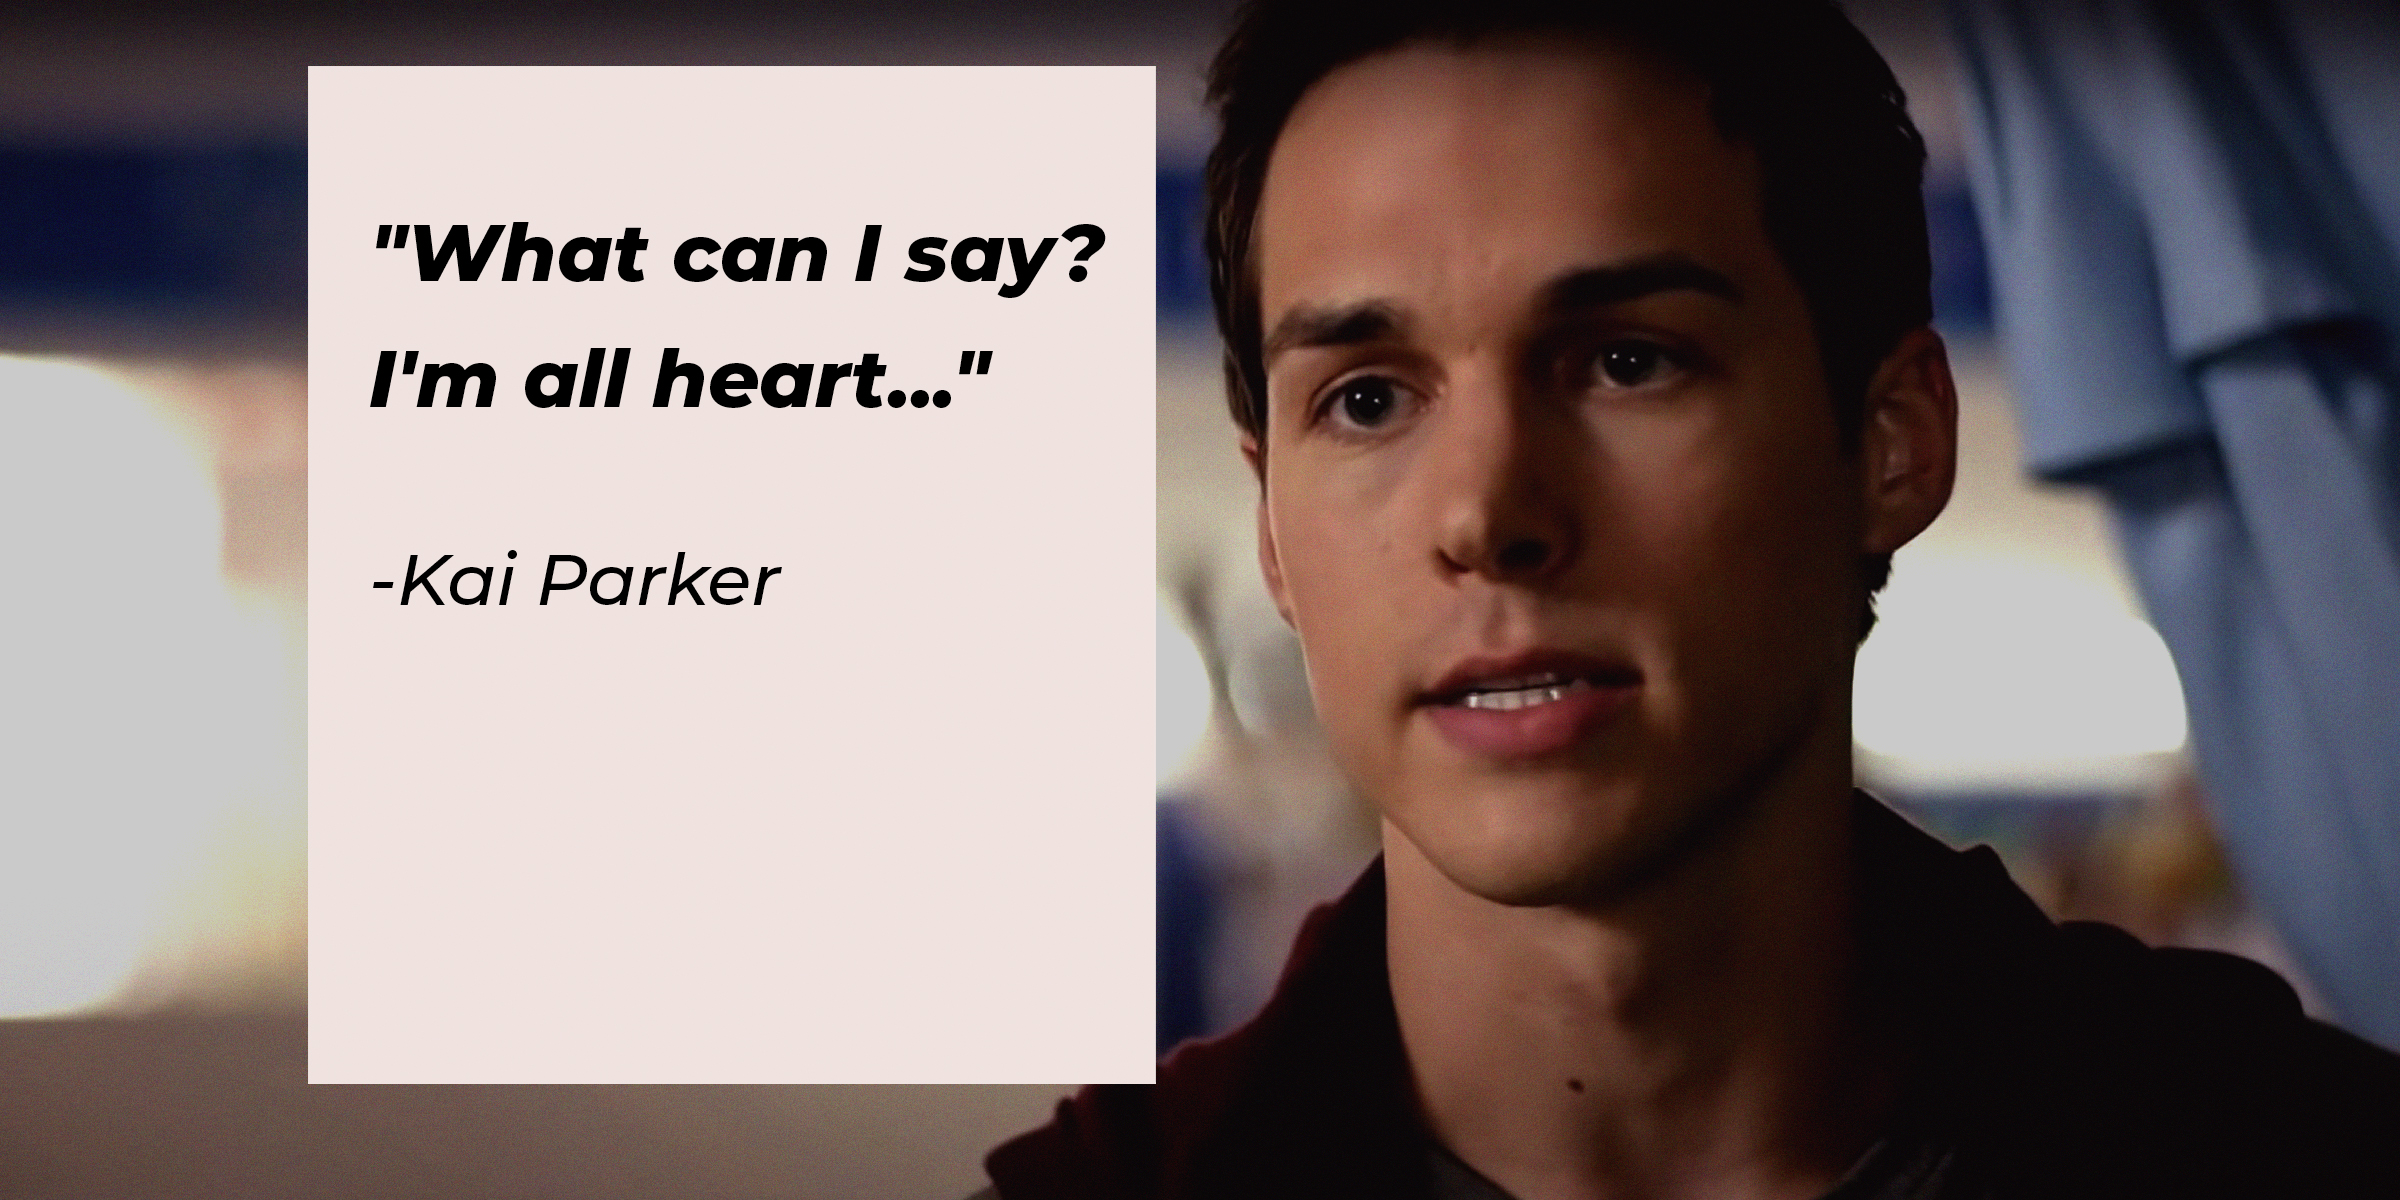 Photo of Kai Parker with the quote: "What can I say? I'm all heart..." | Source: Facebook.com/thevampirediaries